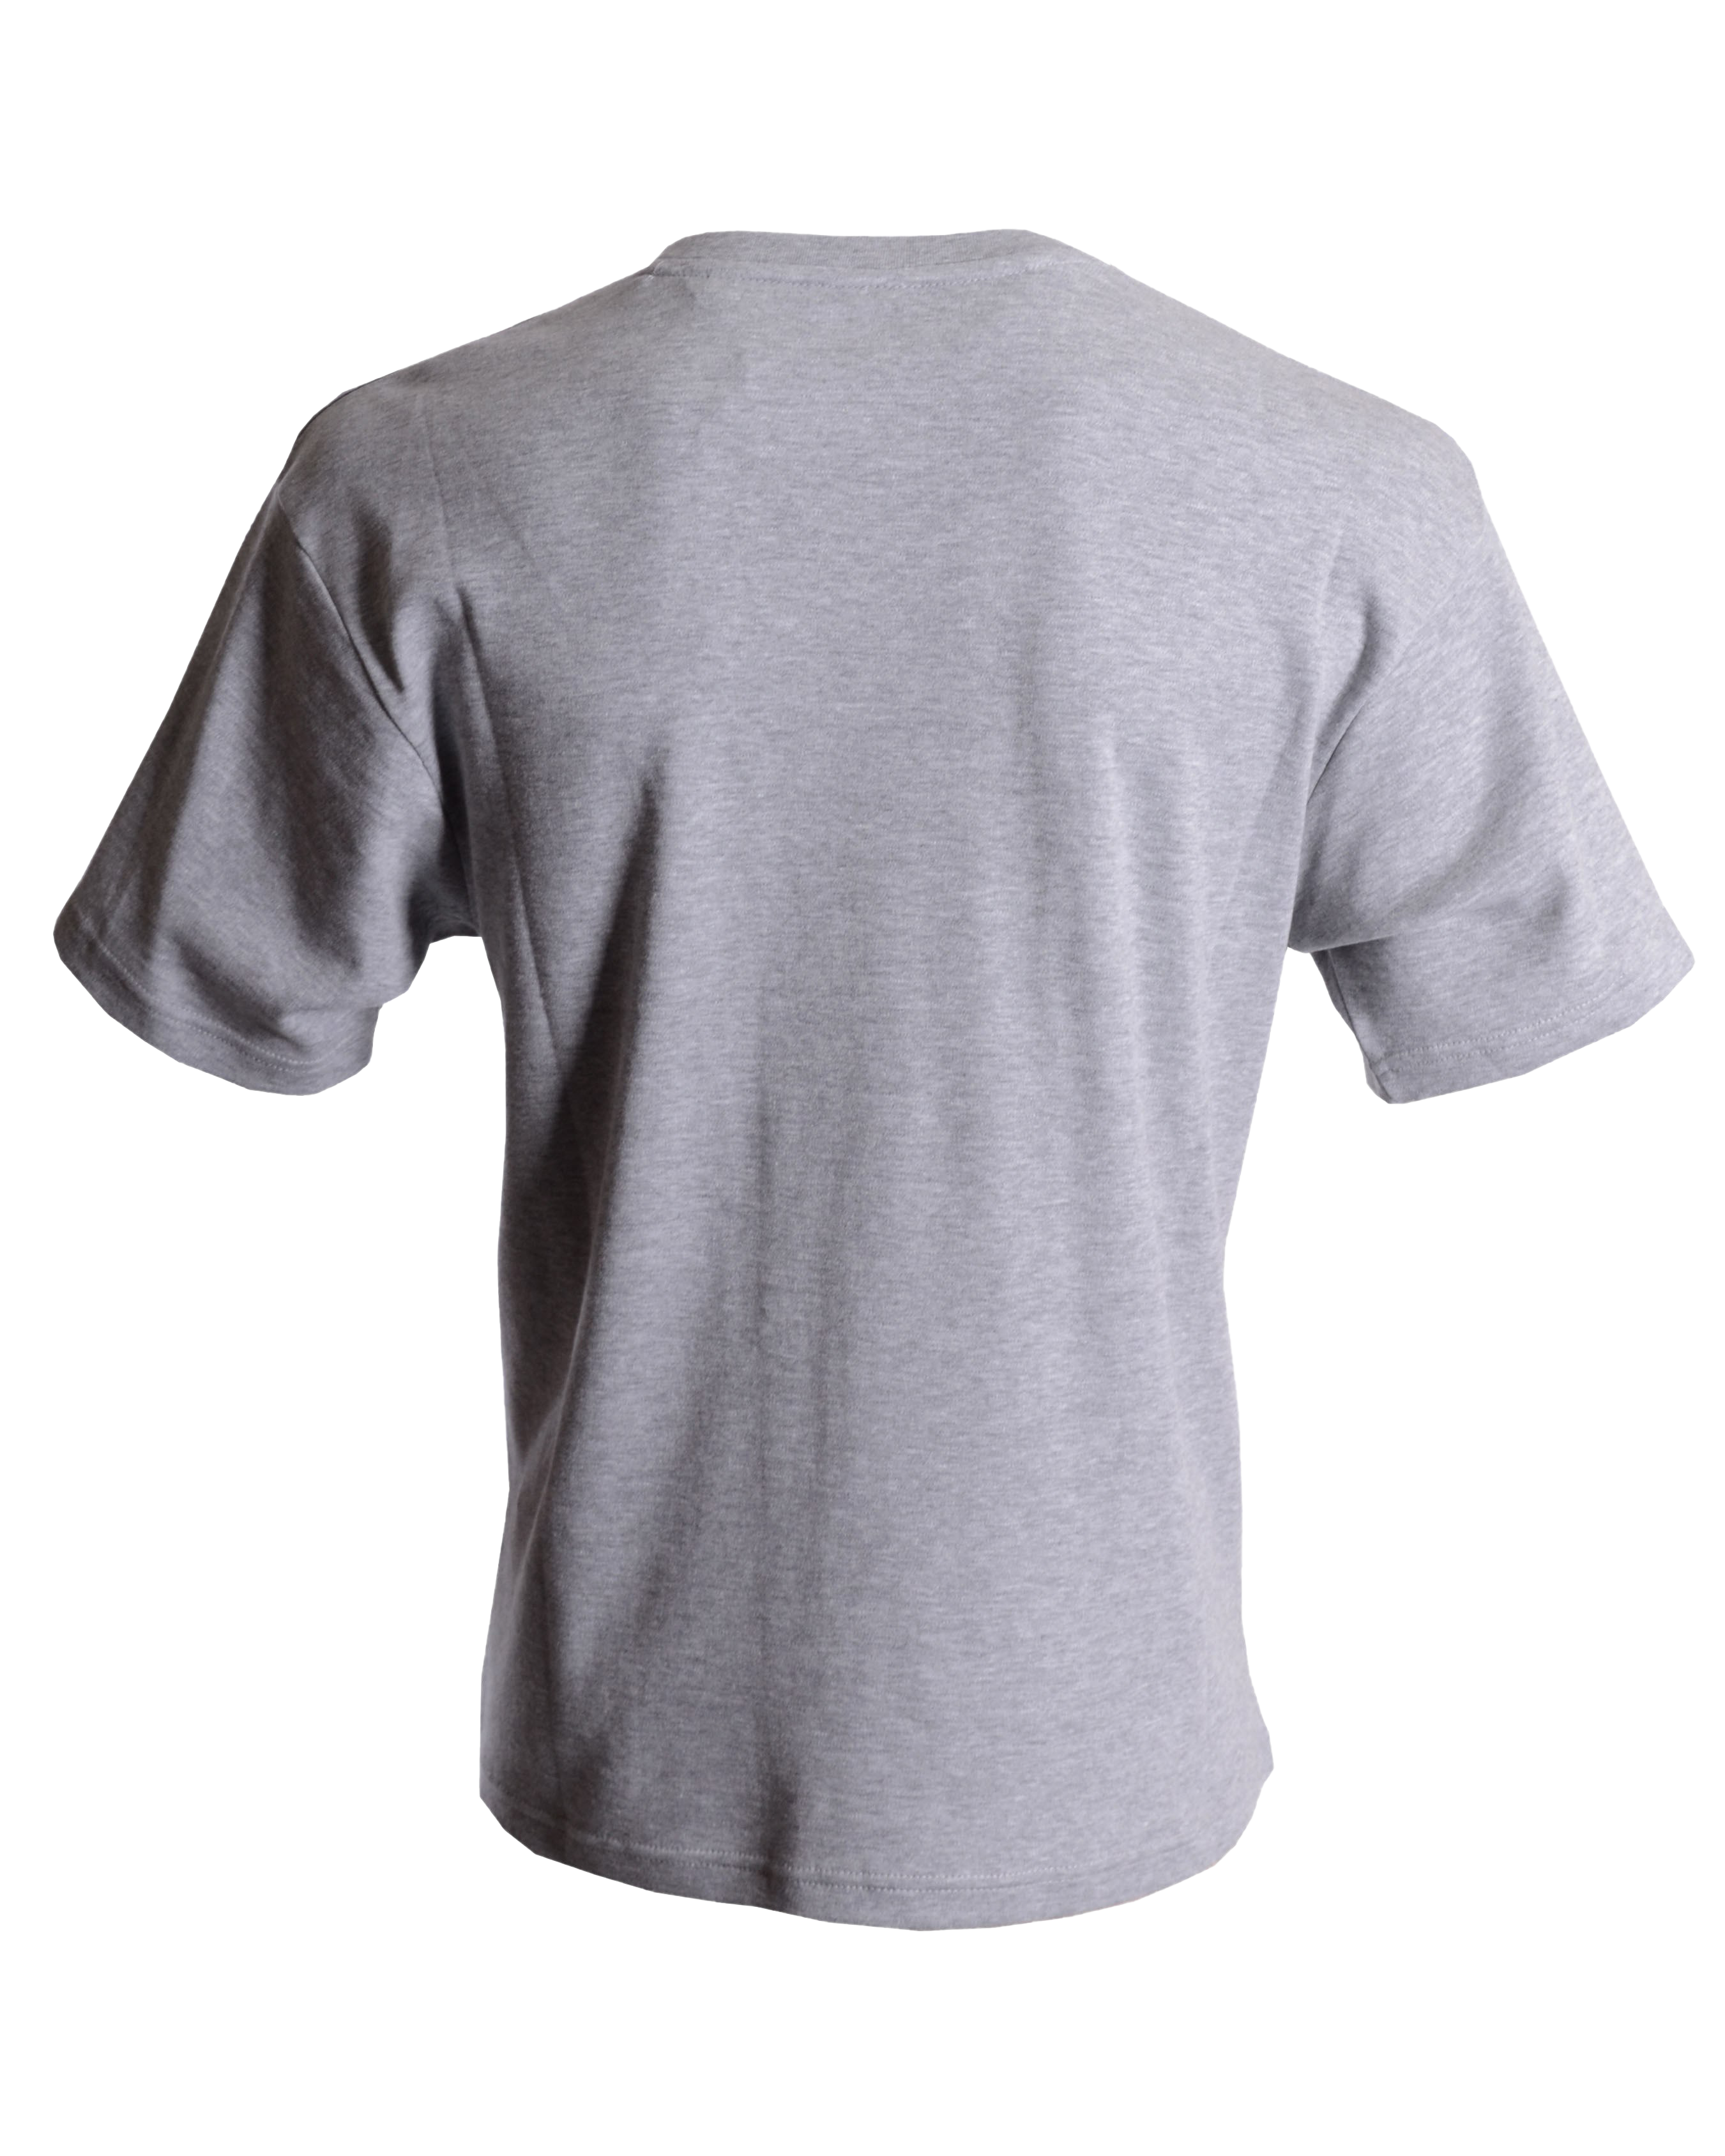 Einfaches graues T-Shirt PNG-Foto